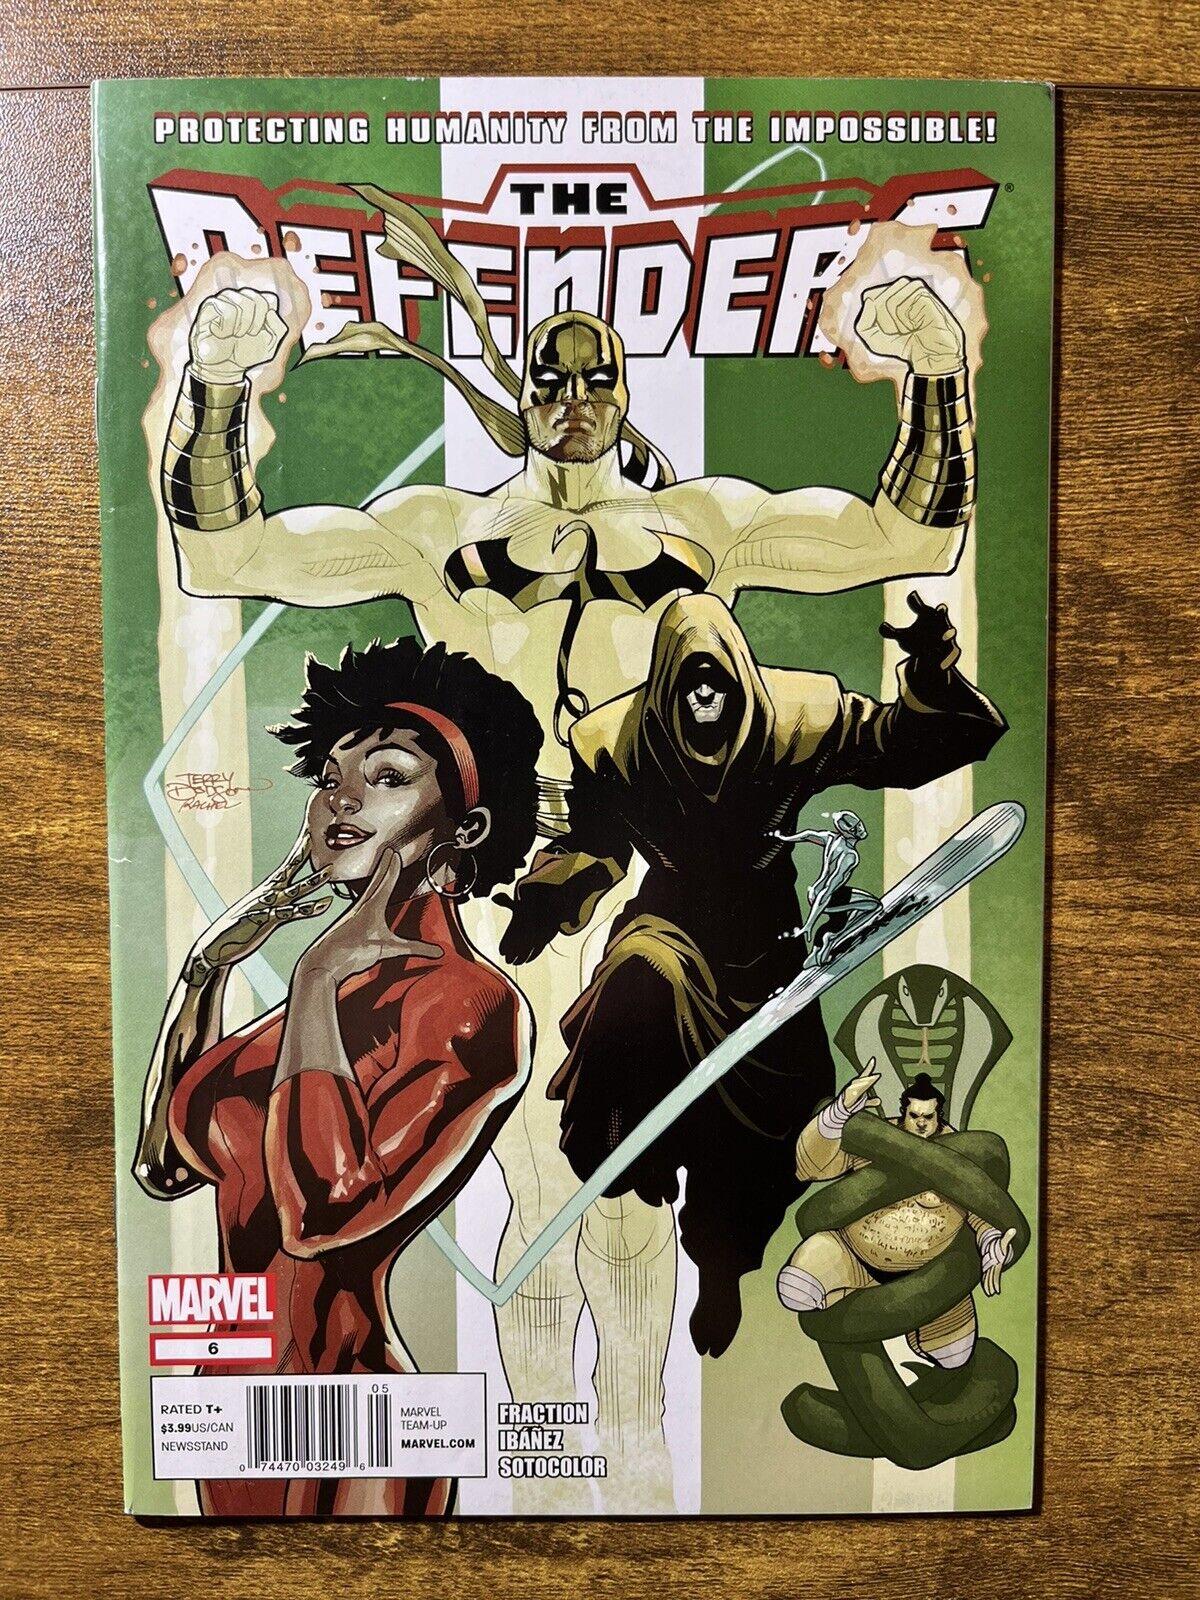 THE DEFENDERS 6 EXTREMELY RARE NEWSSTAND VARIANT MARVEL COMICS 2012